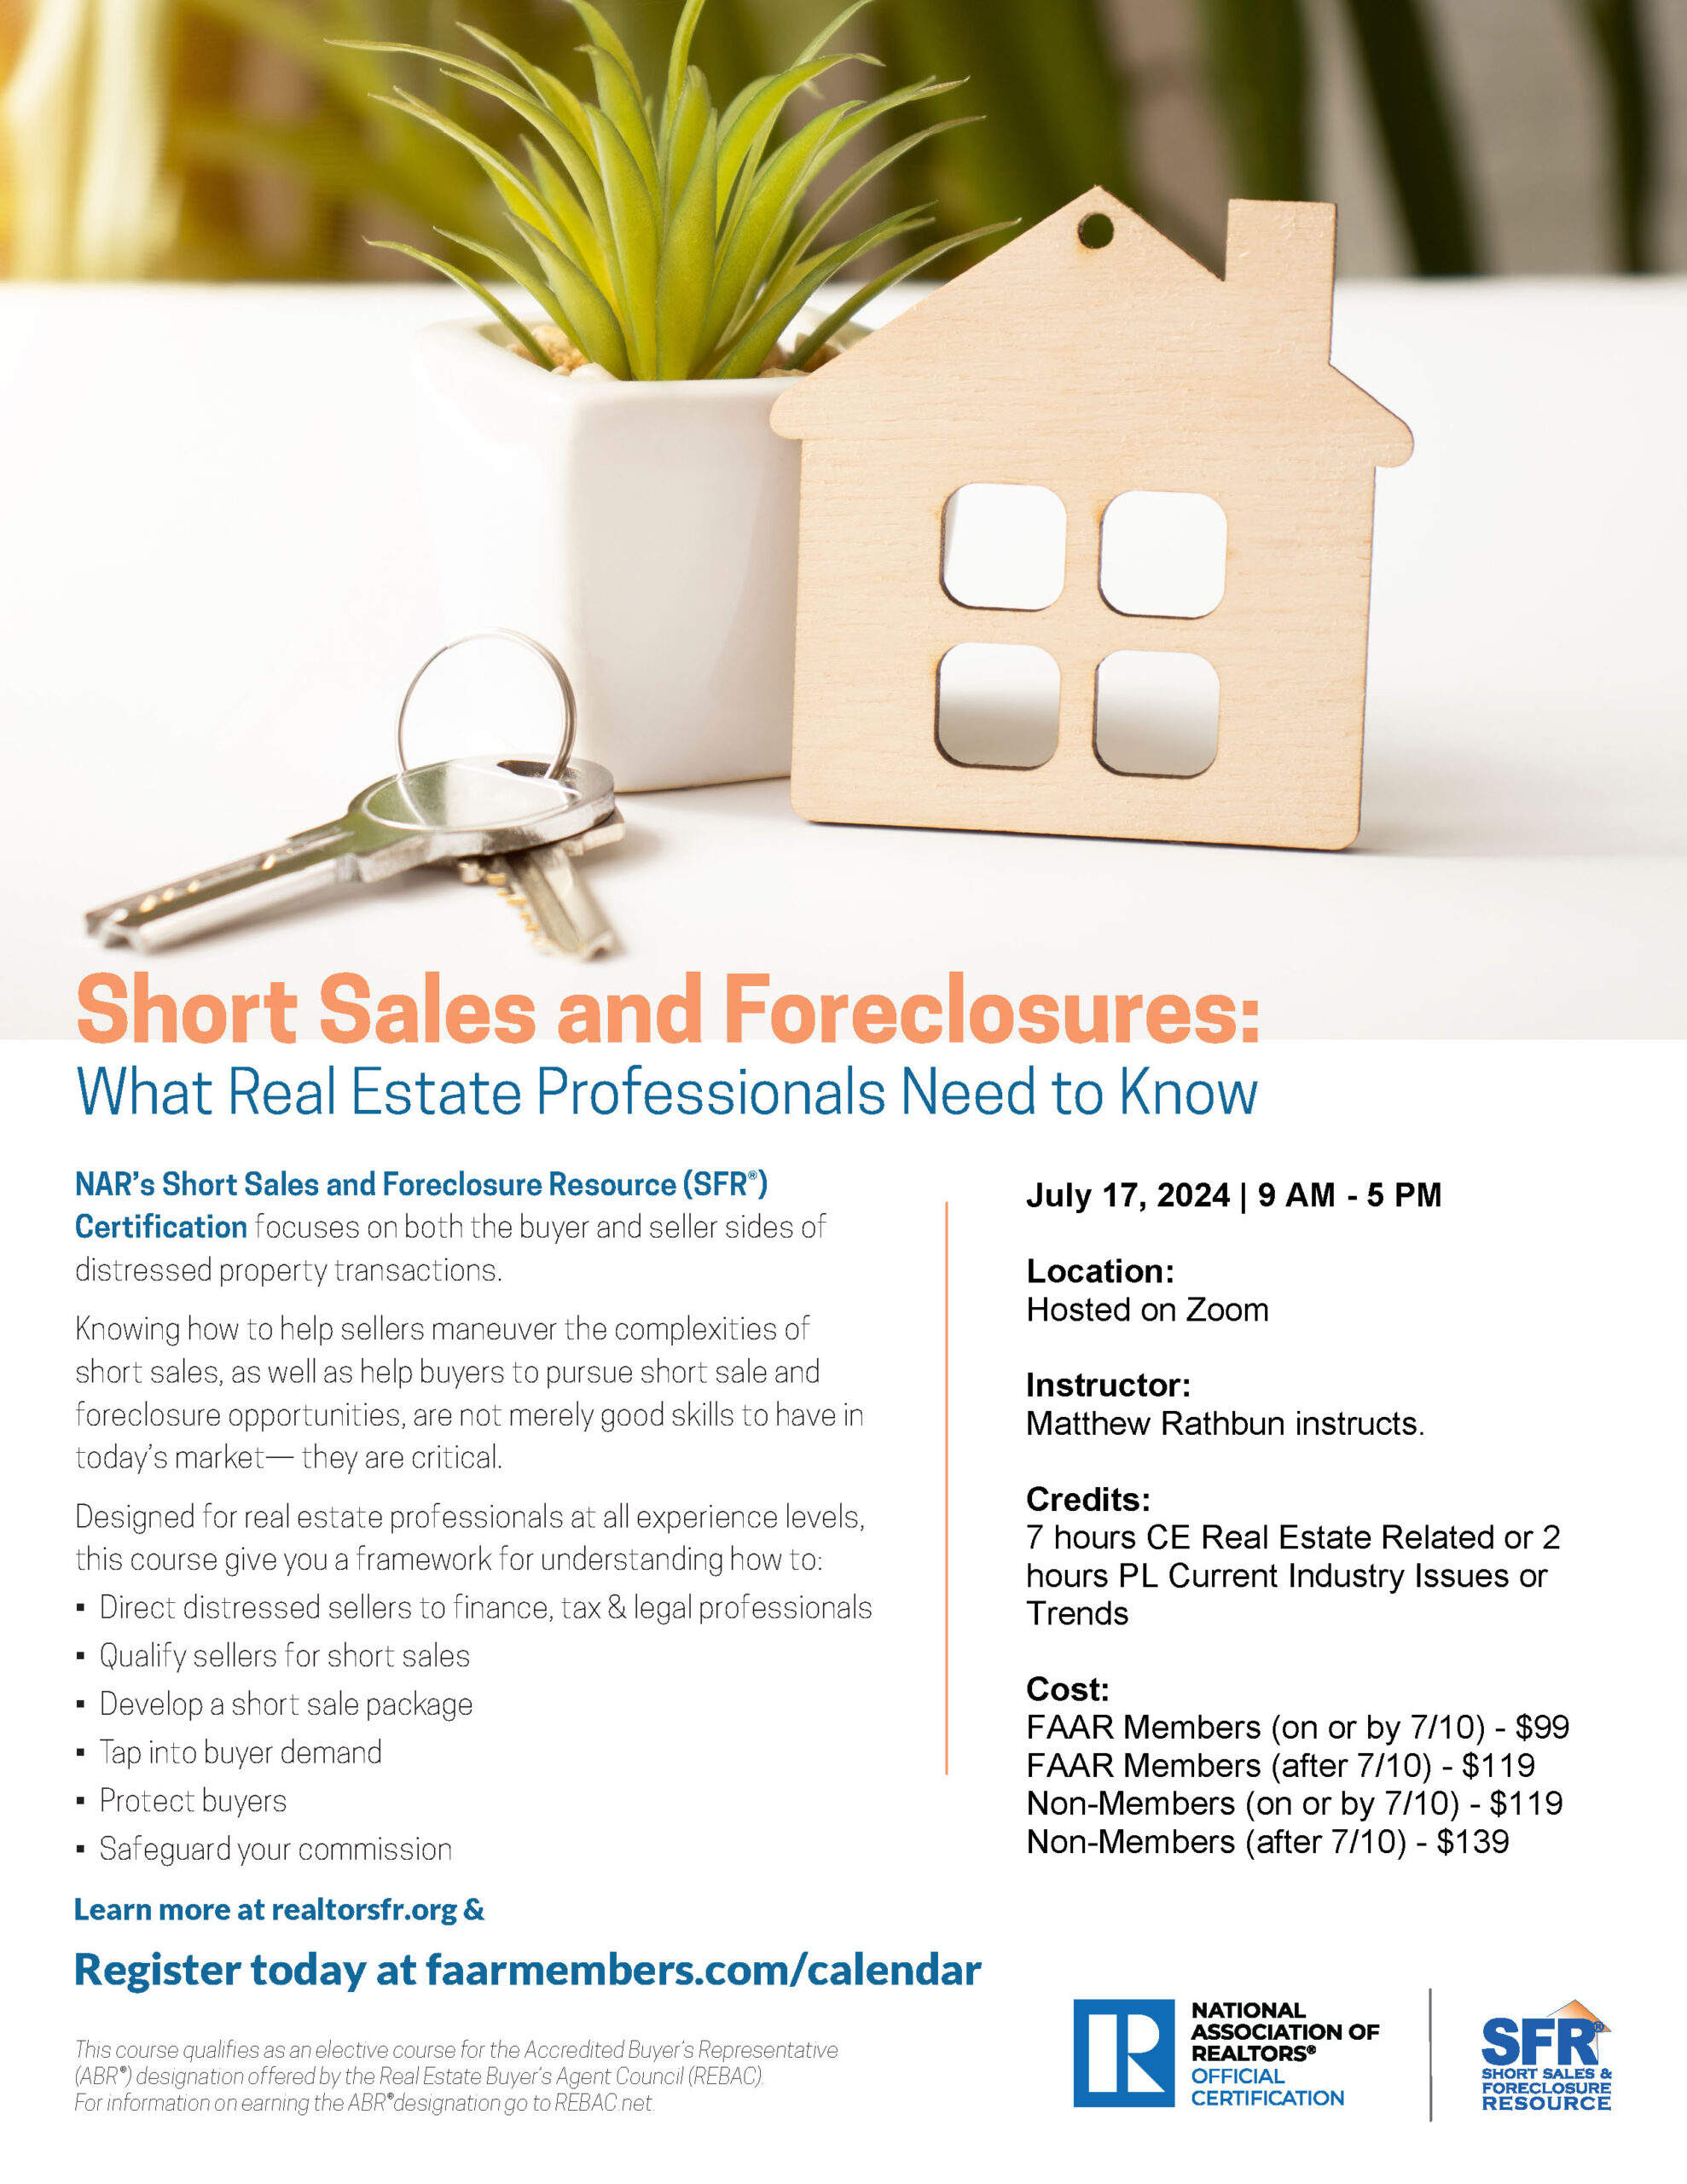 Short sales and foreclosure certification class flyer for July 17, 2024 on Zoom. Call 540-373-7711 for details.